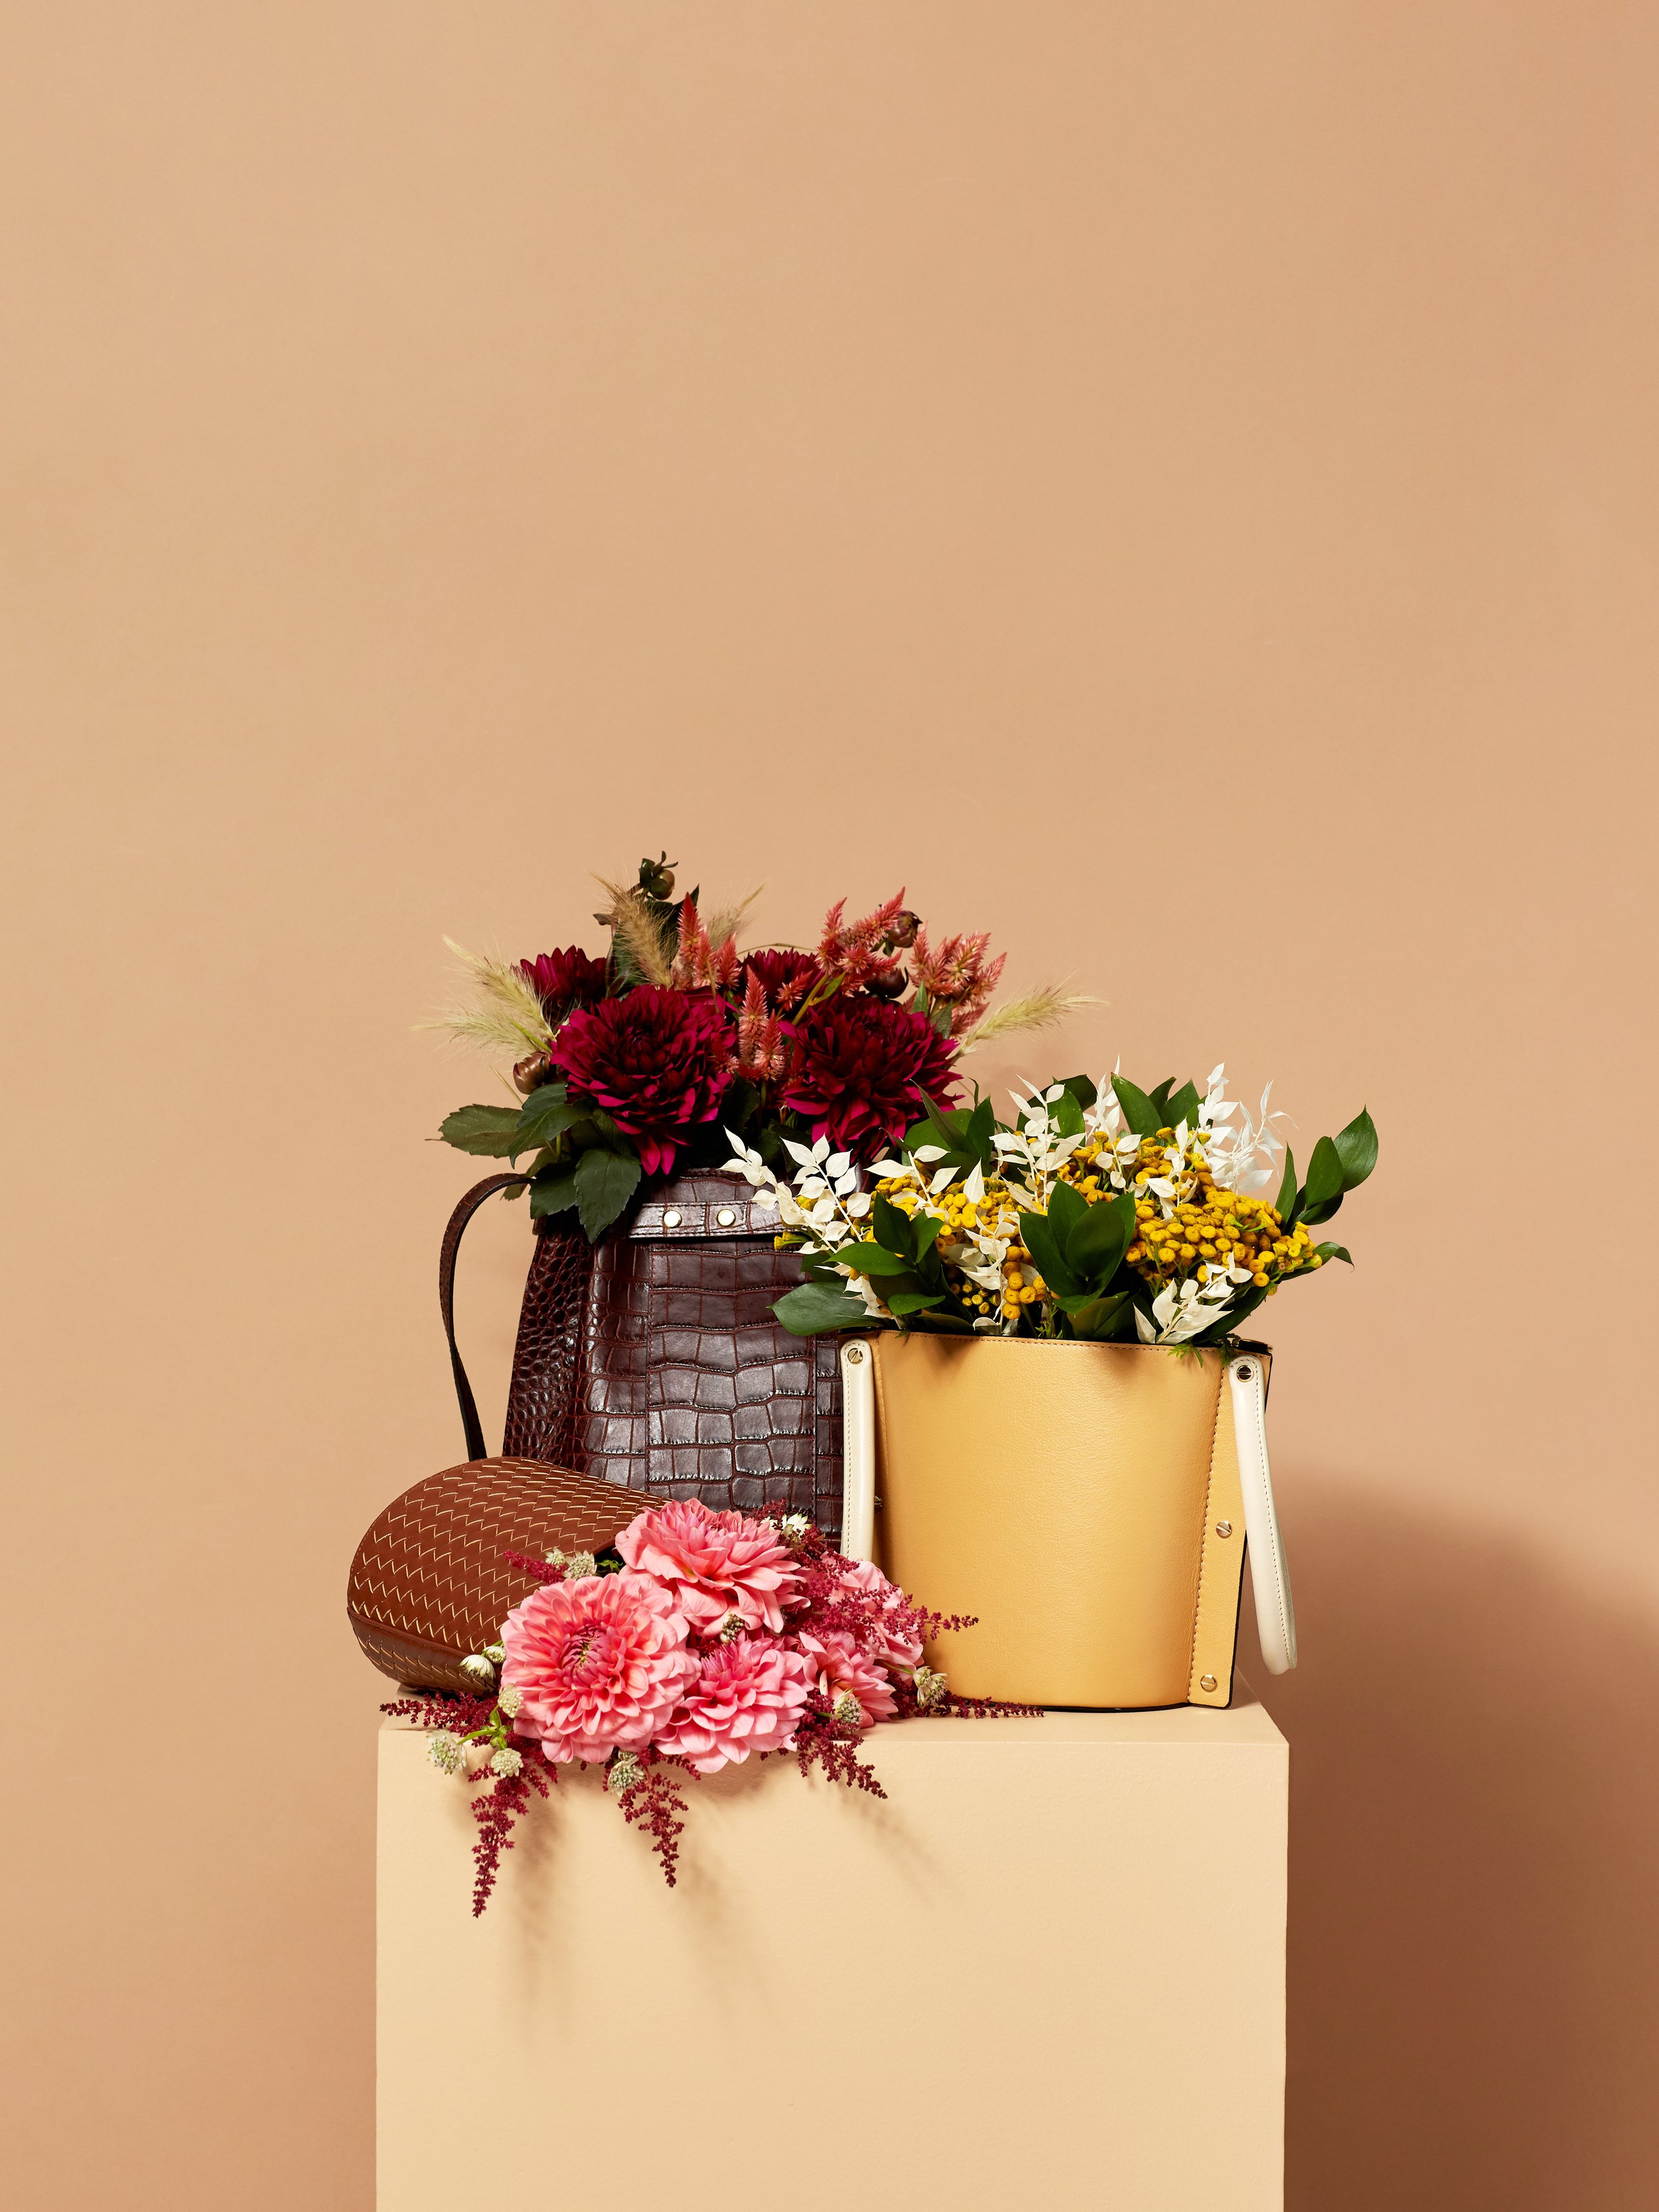 20190808_StillLife_Fall_BagsWithFlorals_049_RETOUCHED_3x4.jpg